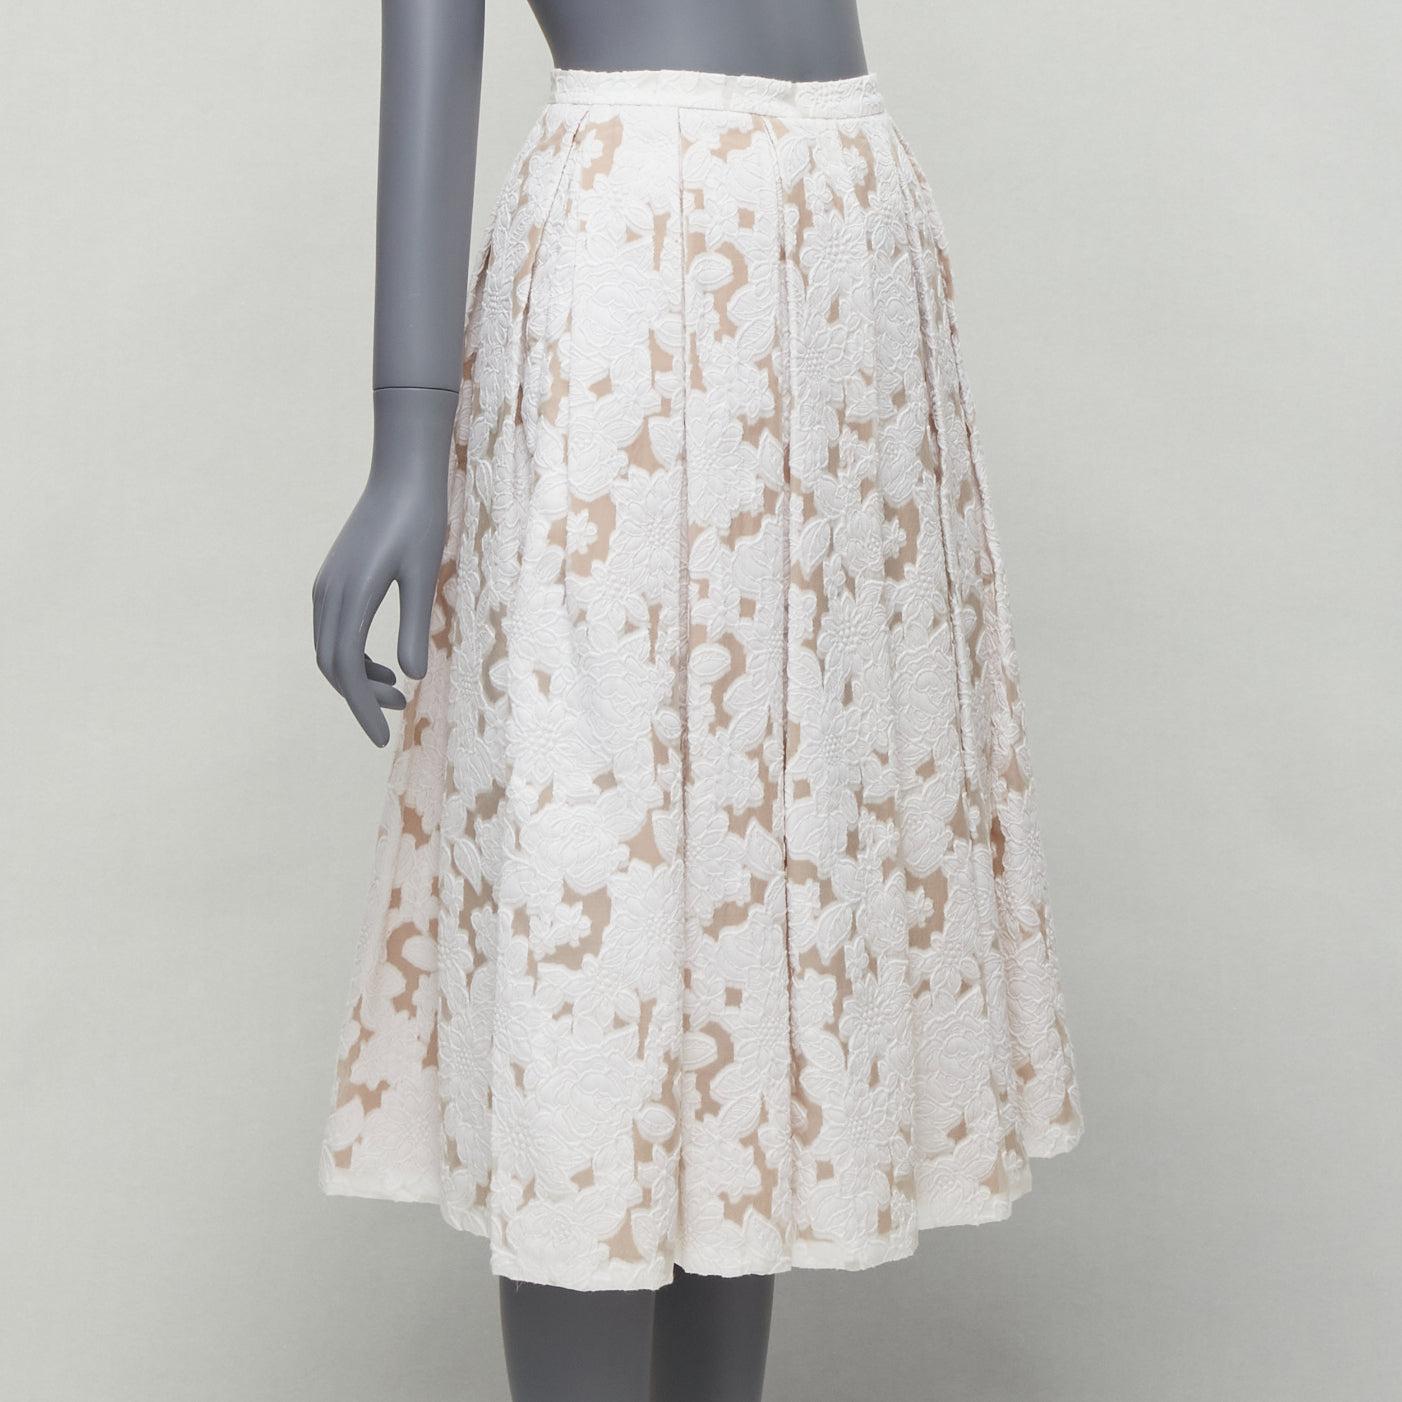 MICHAEL KORS COLLECTION white beige cotton silk floral jacquard skirt US0 XS
Reference: SNKO/A00309
Brand: Michael Kors
Collection: COLLECTION
Material: Cotton, Silk
Color: White, Beige
Pattern: Lace
Closure: Zip
Lining: Beige Silk
Extra Details: